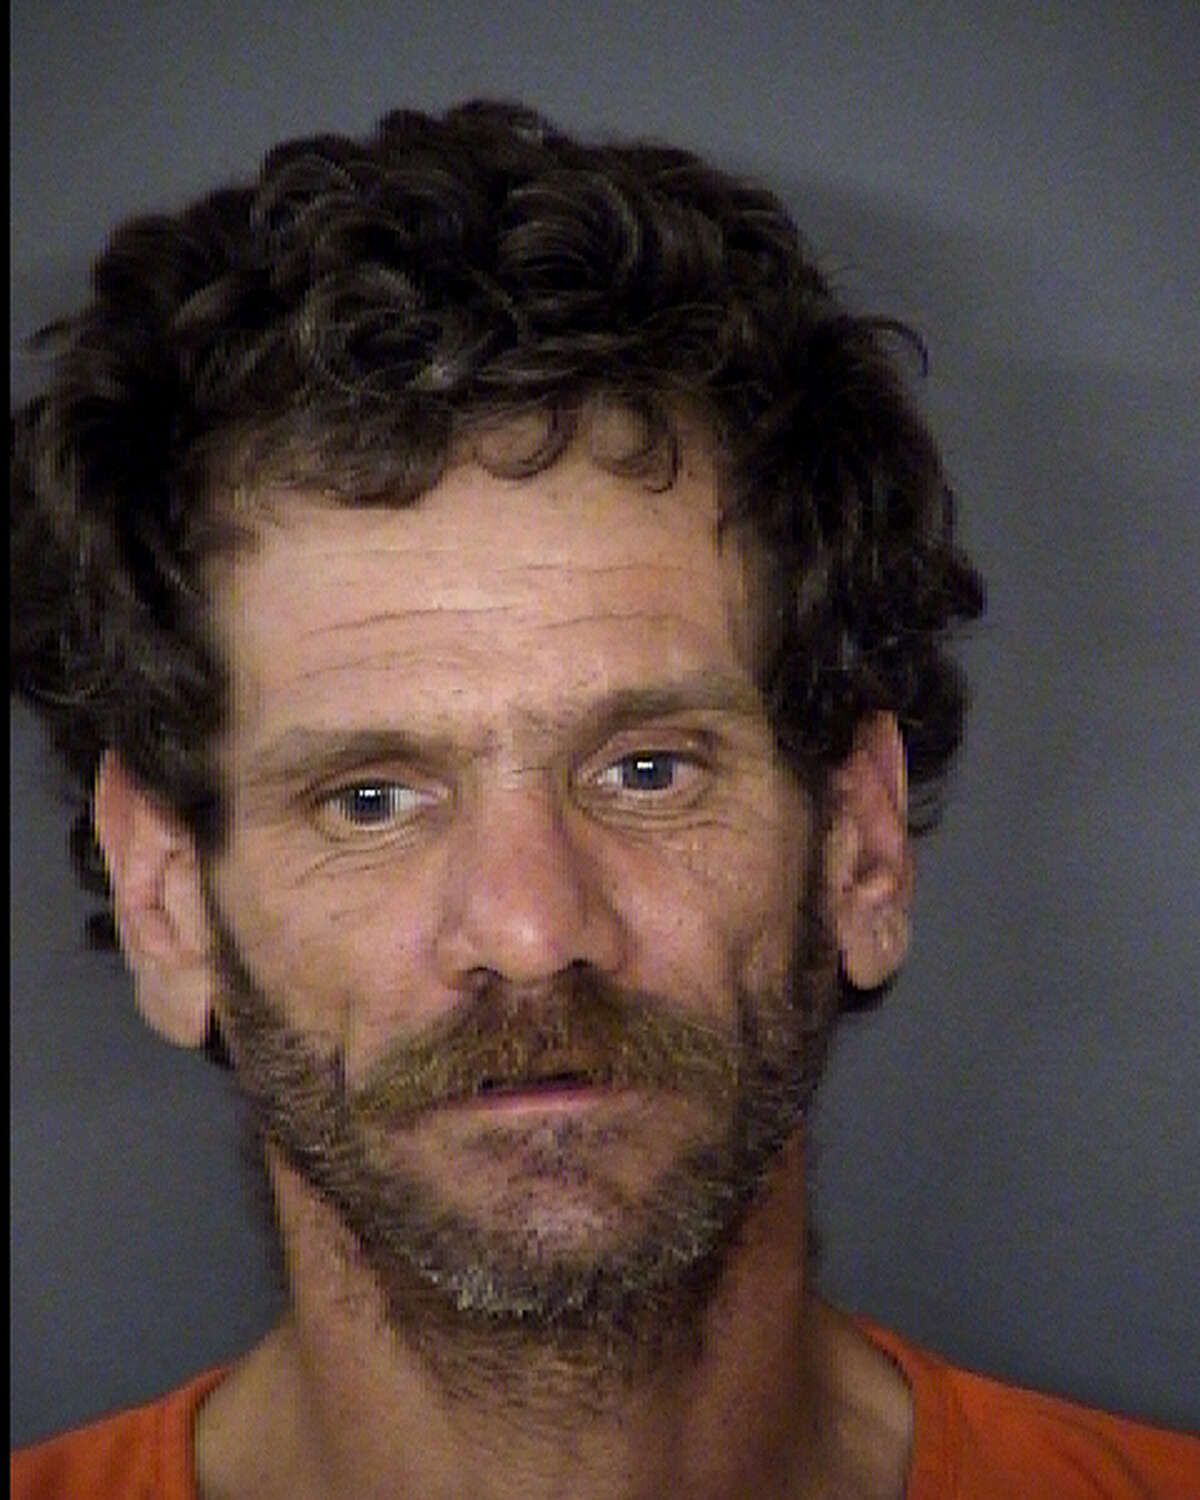 Patrick Ring, 45, was arrested on Feb. 6 with Dianna Ring for allegedly stealing metal from a McDonald's restaurant.